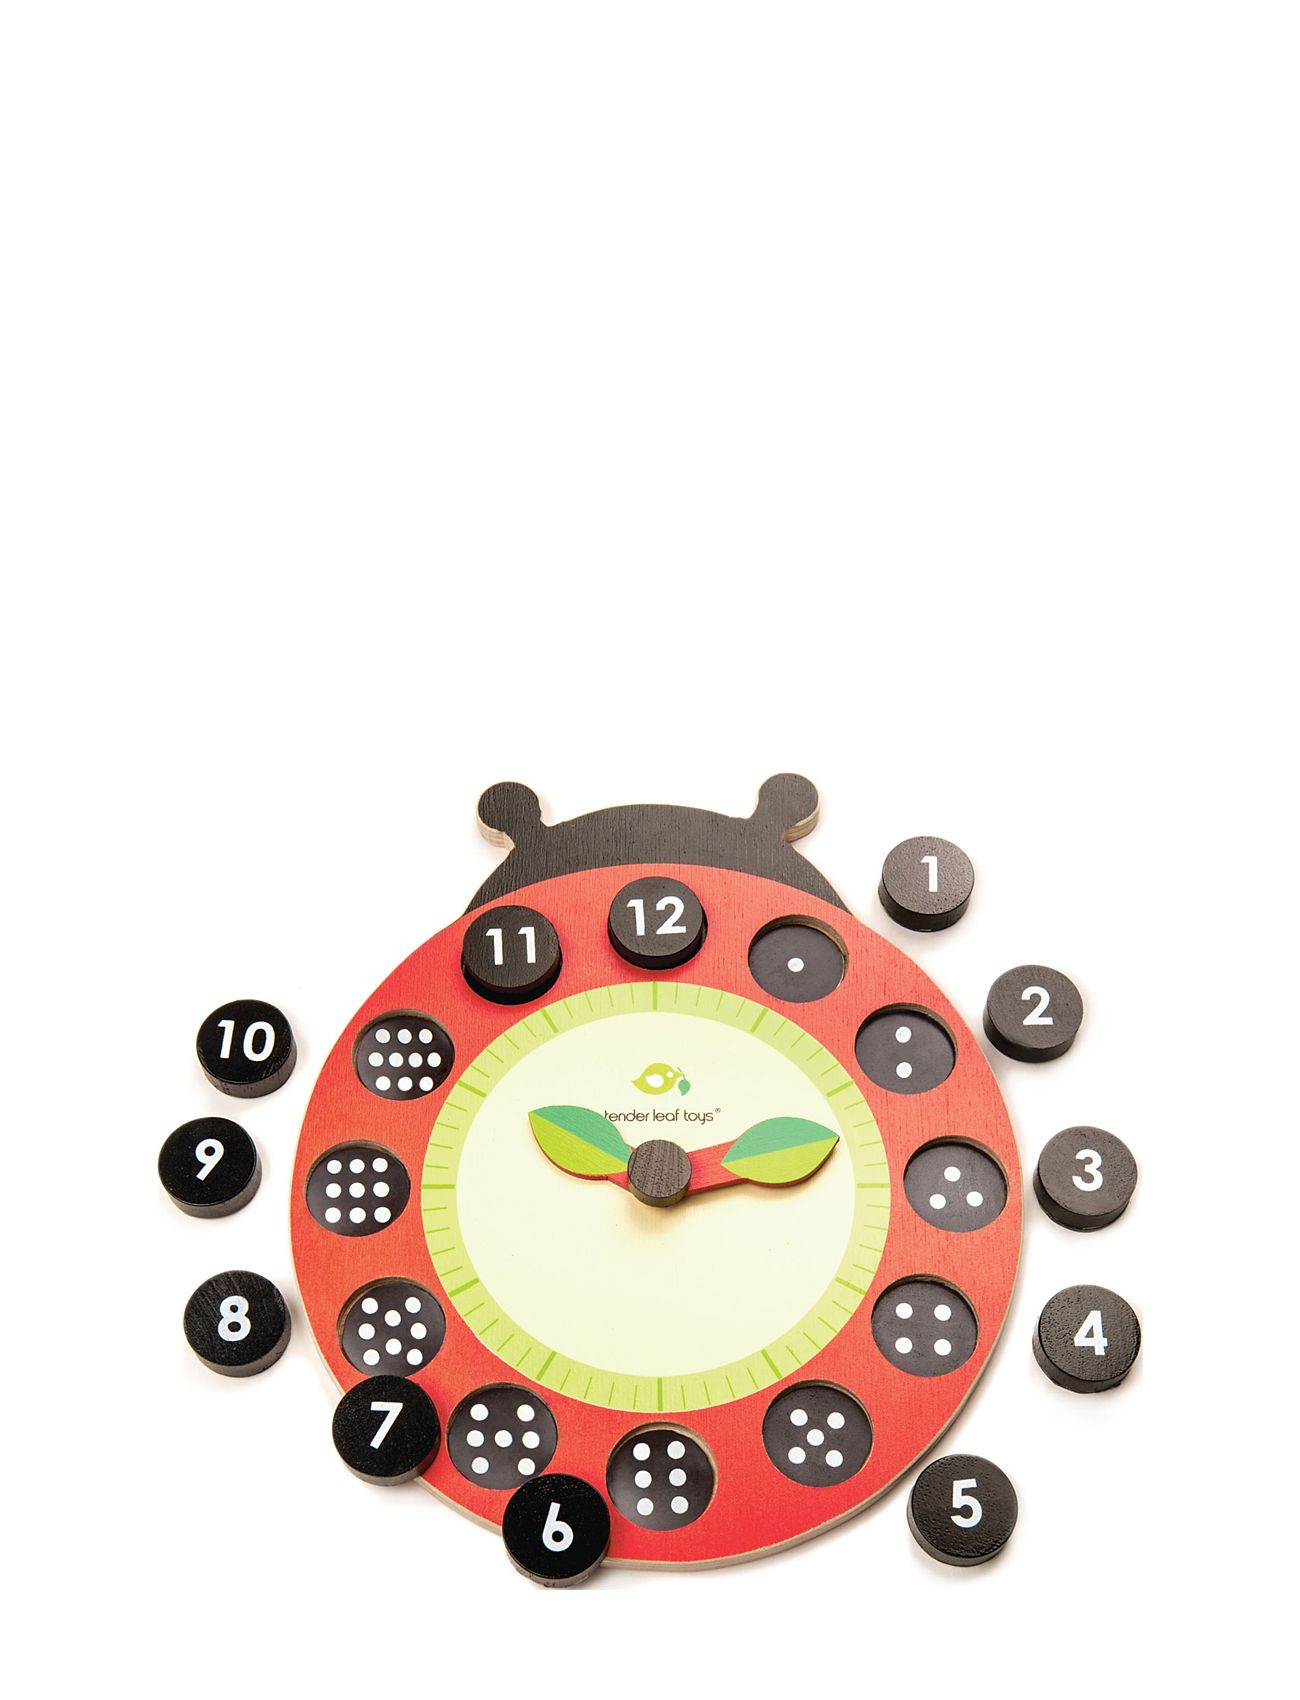 Ladybug Teaching Clock Toys Puzzles And Games Games Educational Games Multi/patterned Tender Leaf